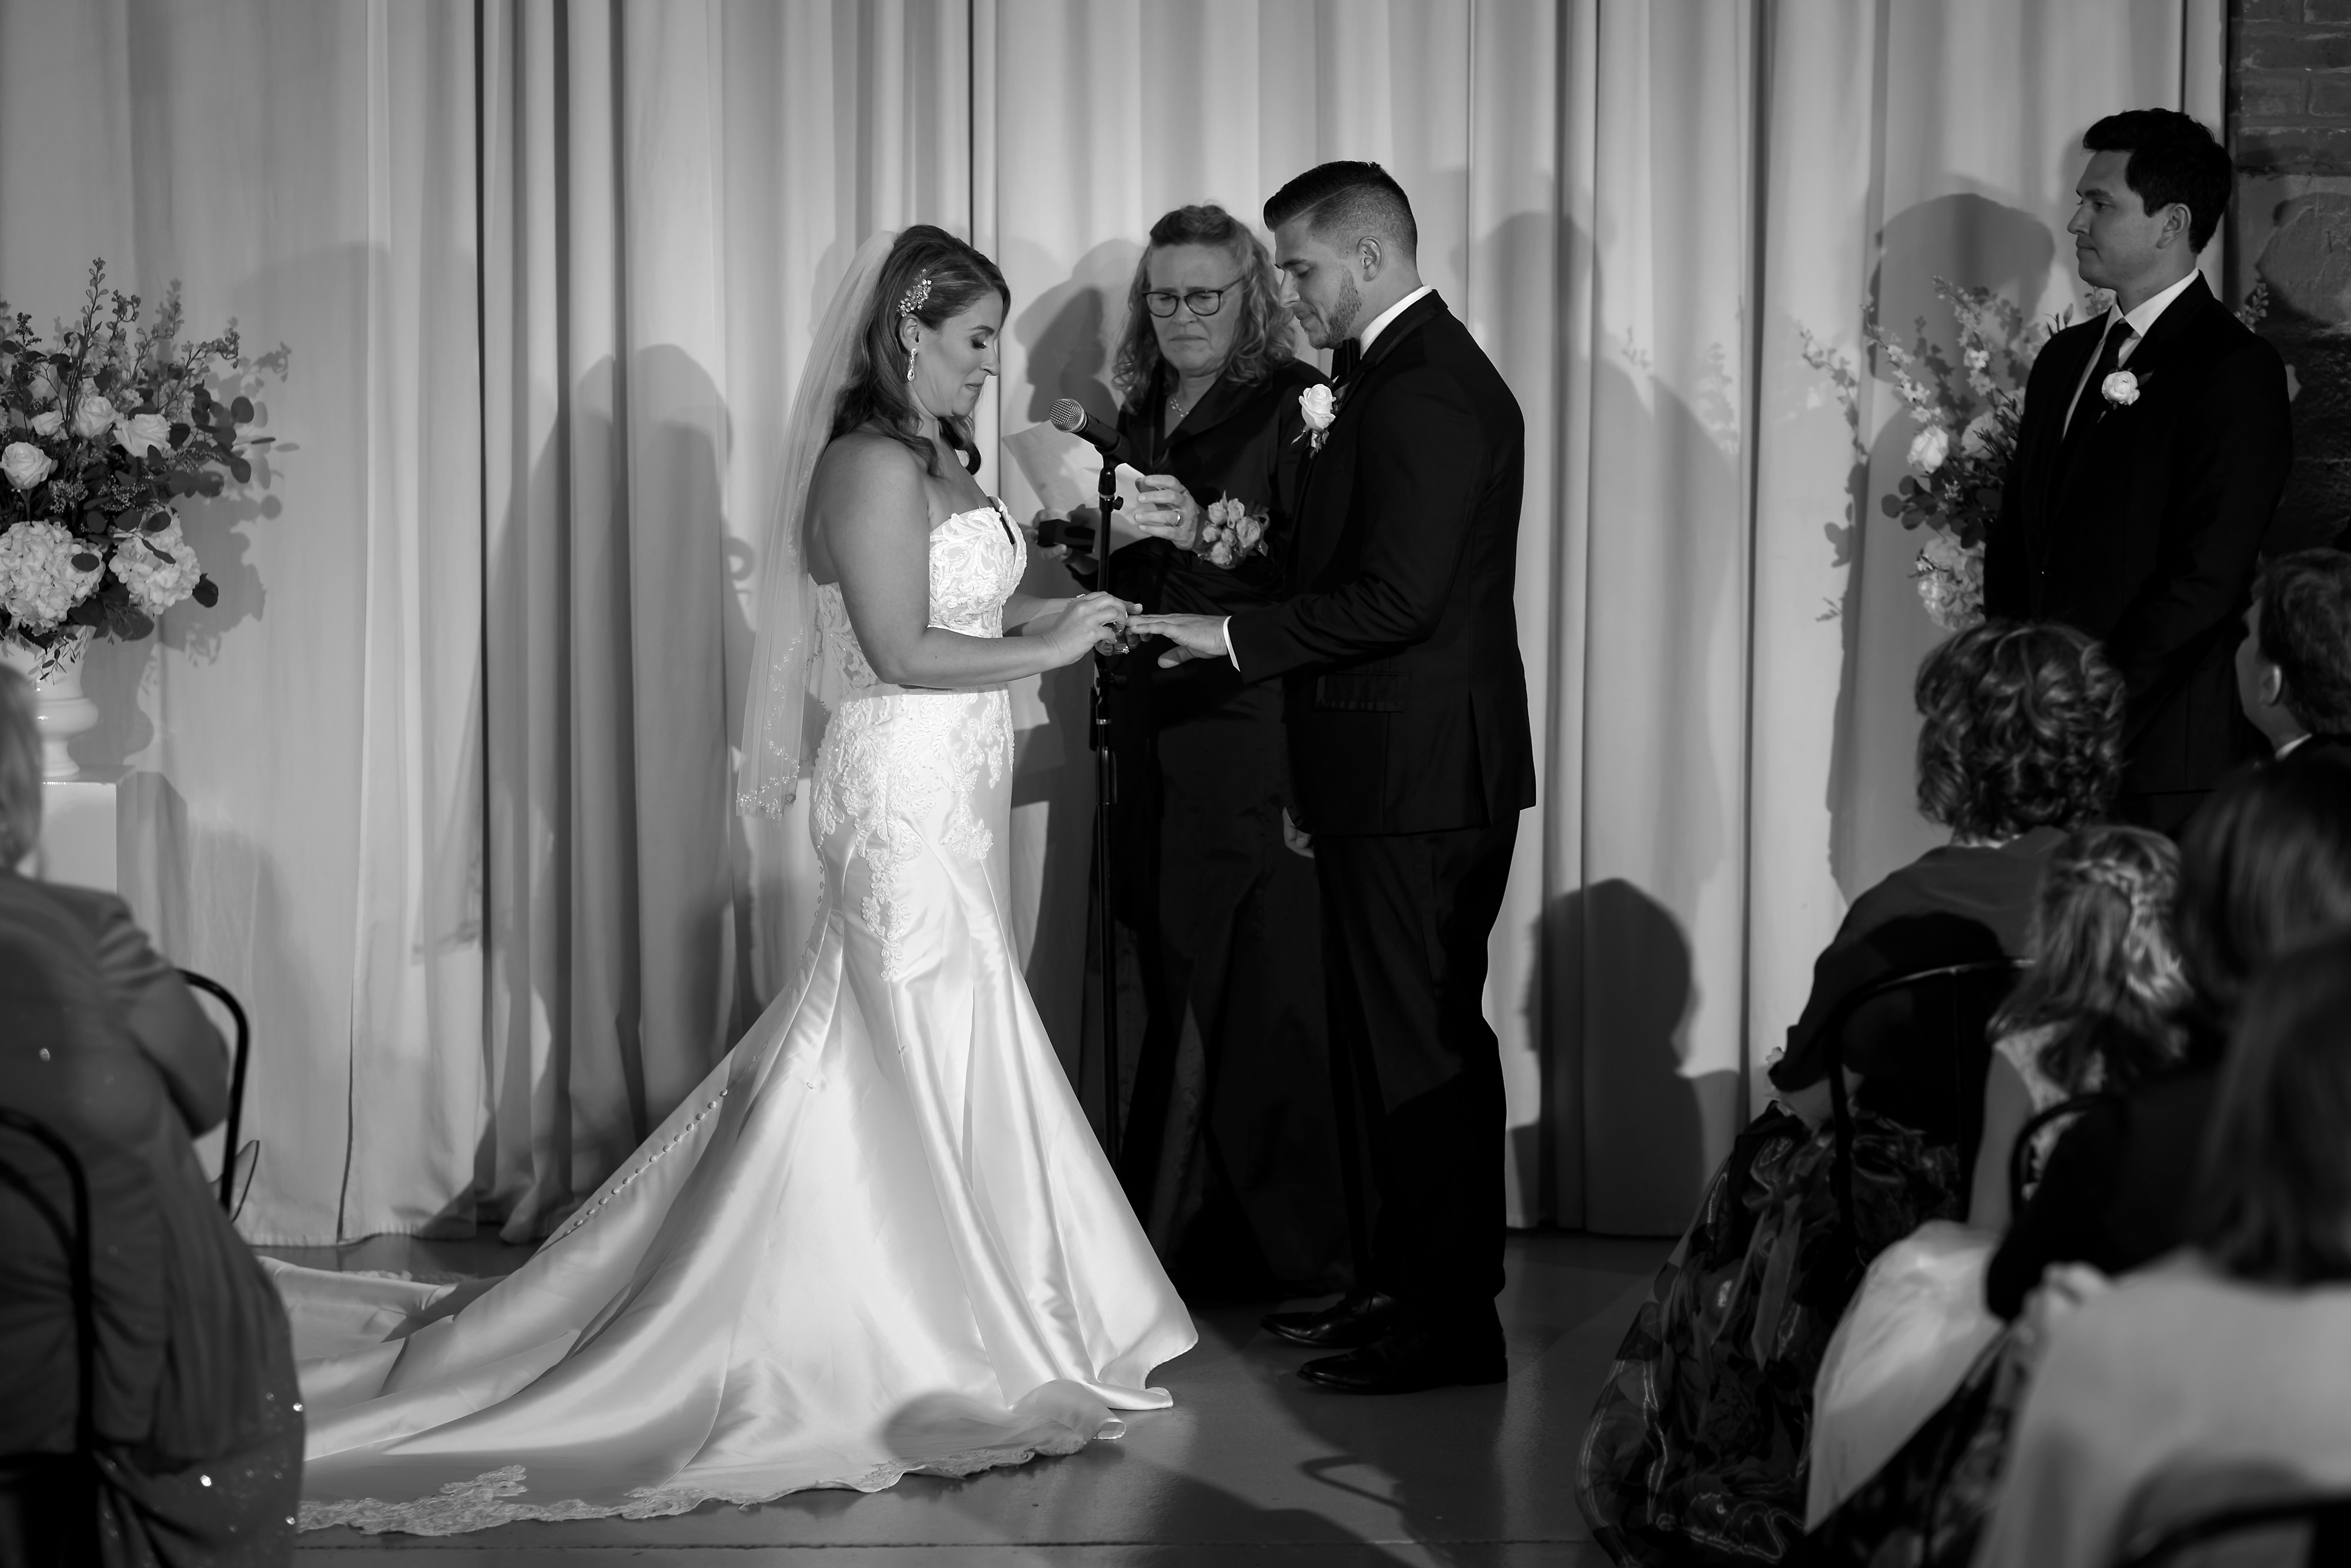 Bride and groom exchange rings during wedding ceremony at Artifact Events in Chicago's Ravenswood neighborhood.